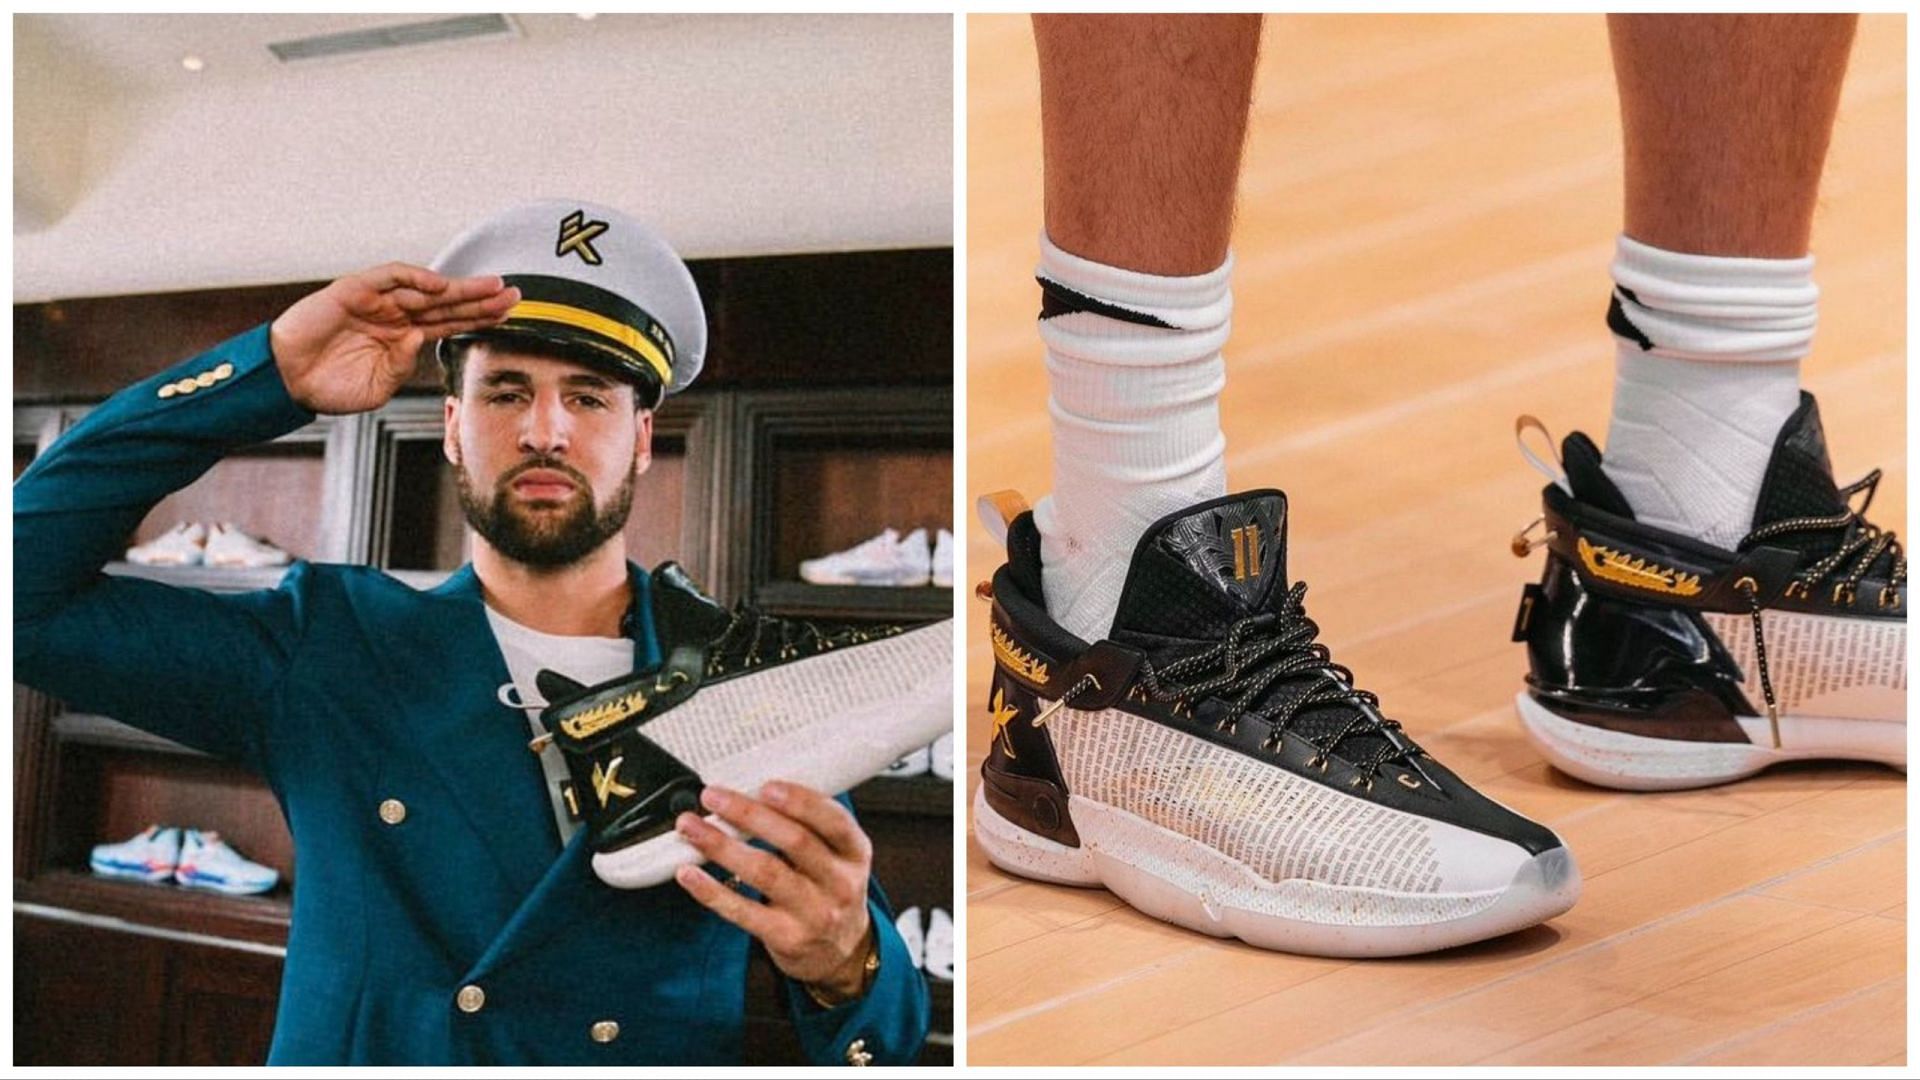 Klay Thompson unveils new Anta shoe while in China.